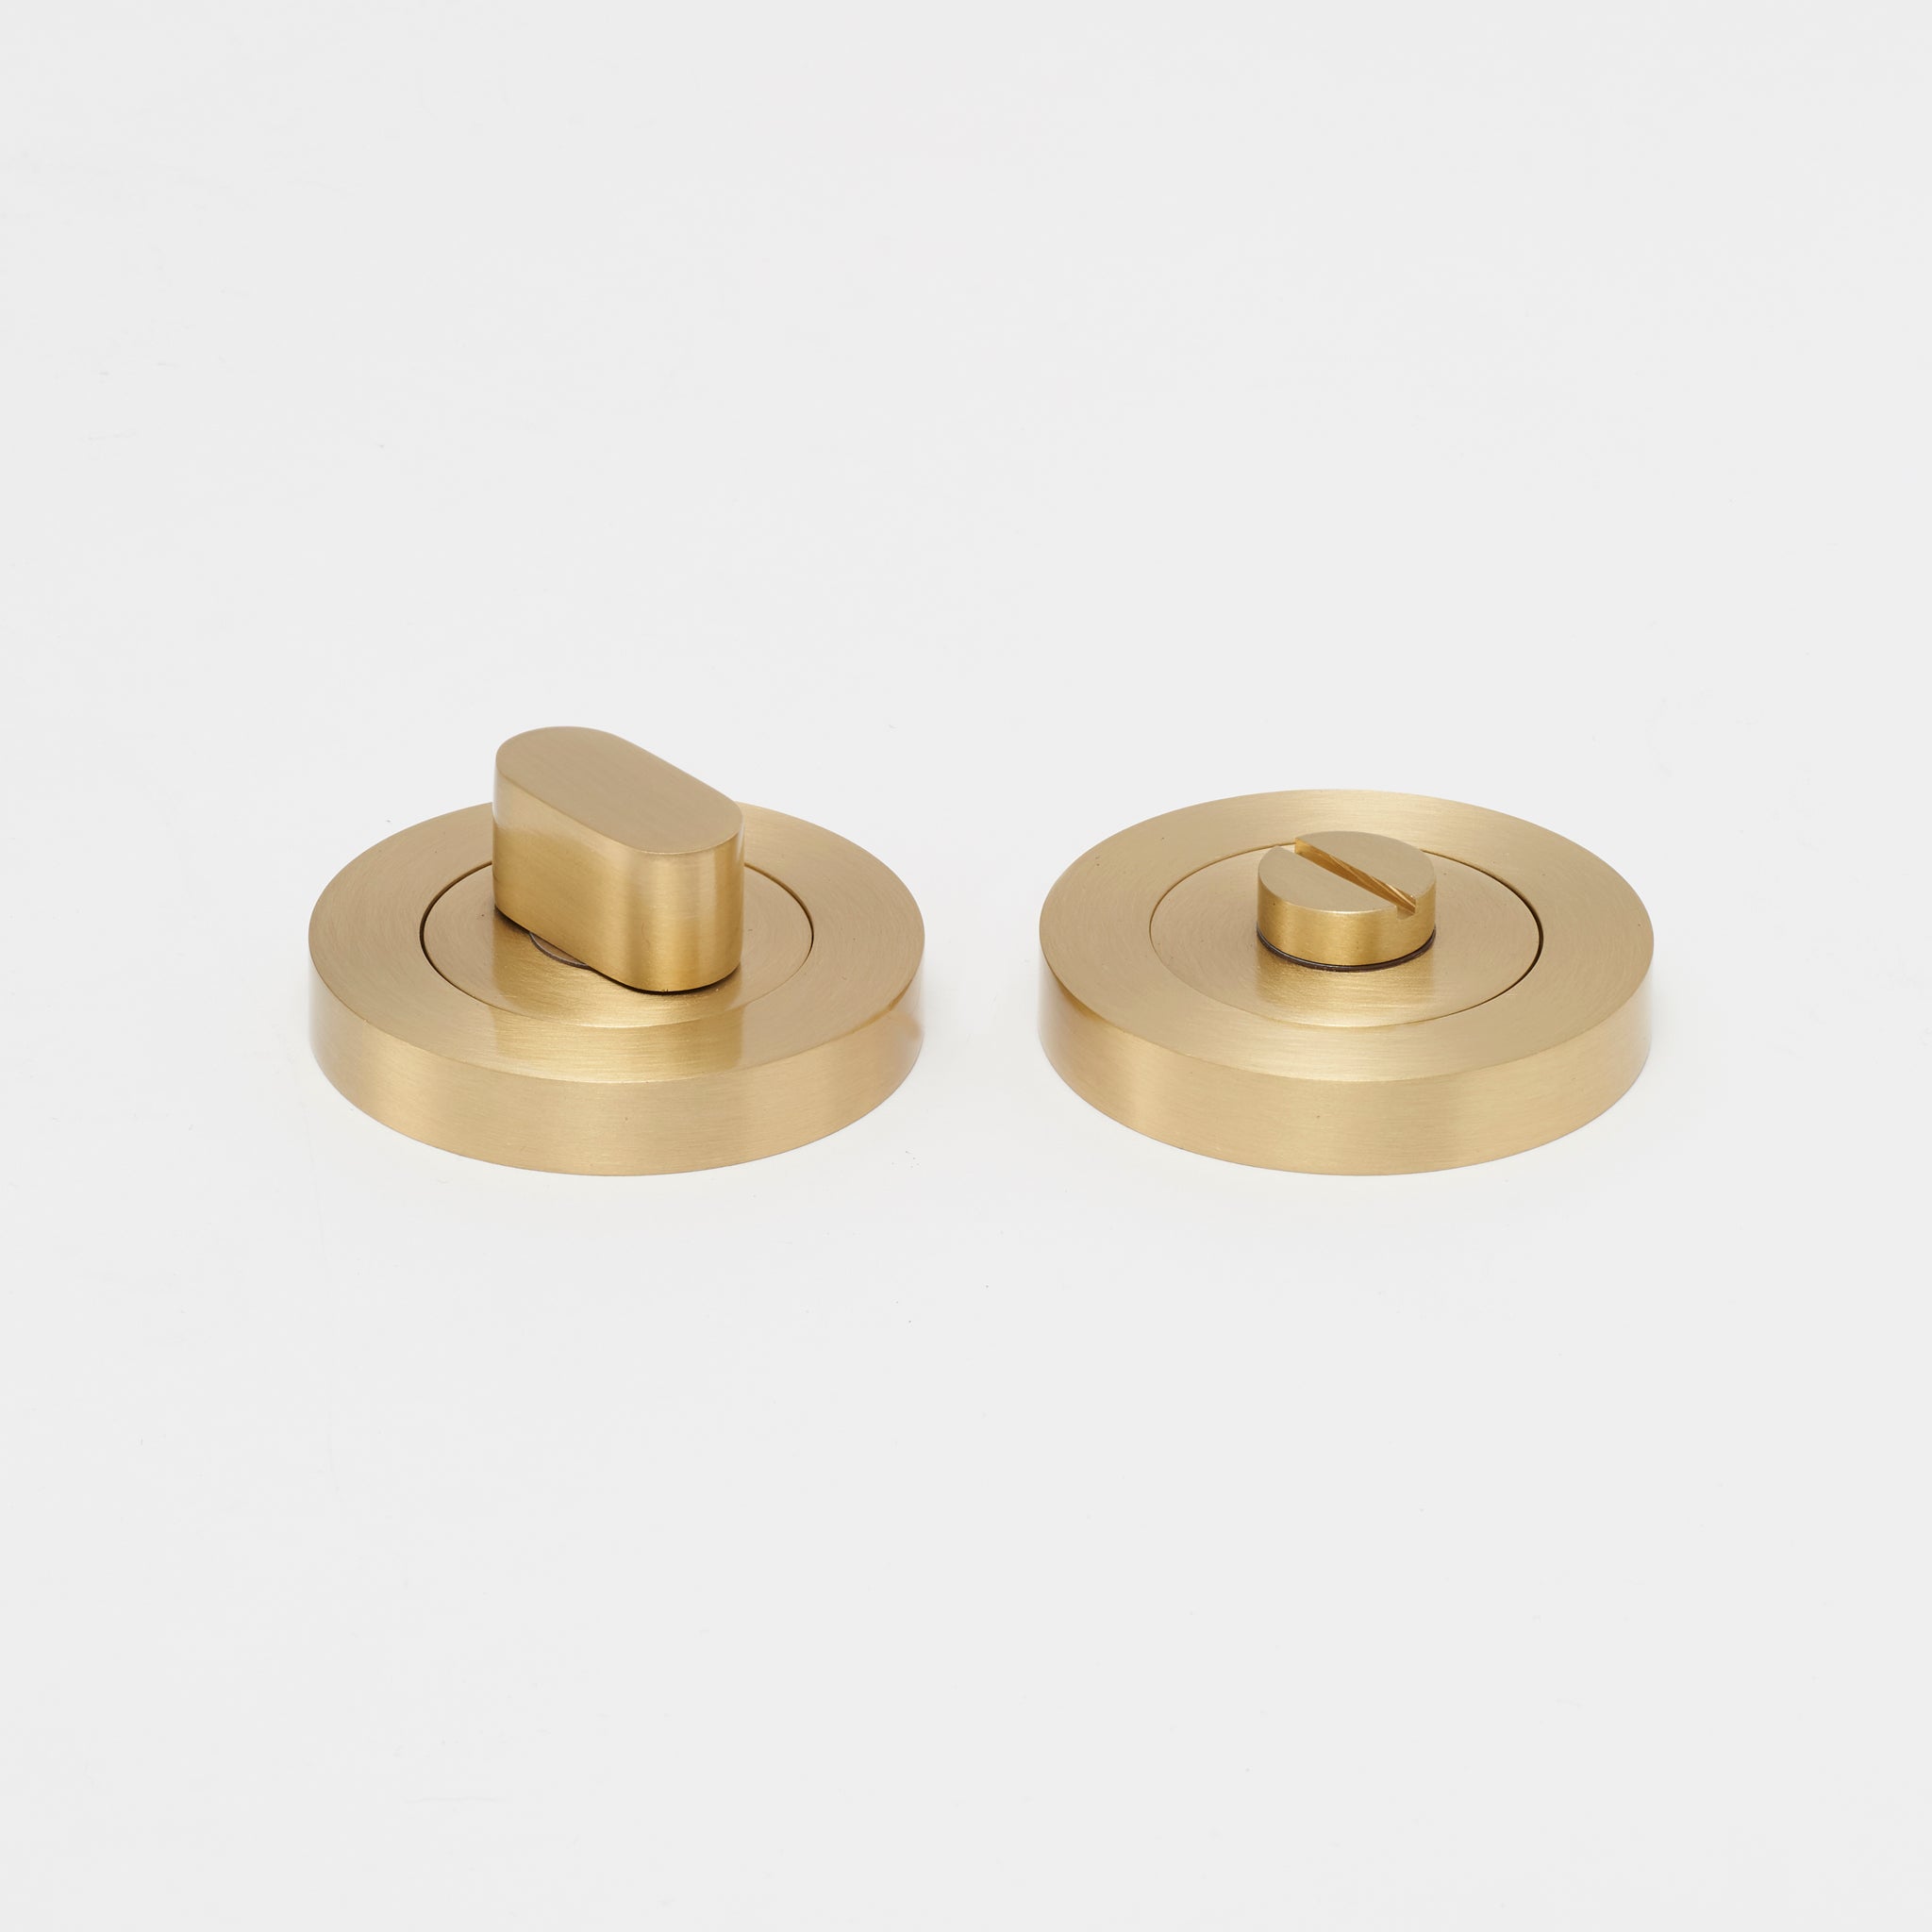 https://cdn.shopify.com/s/files/1/0565/6100/8816/products/lo-and-co-privacy-turn-brass.jpg?v=1630649071